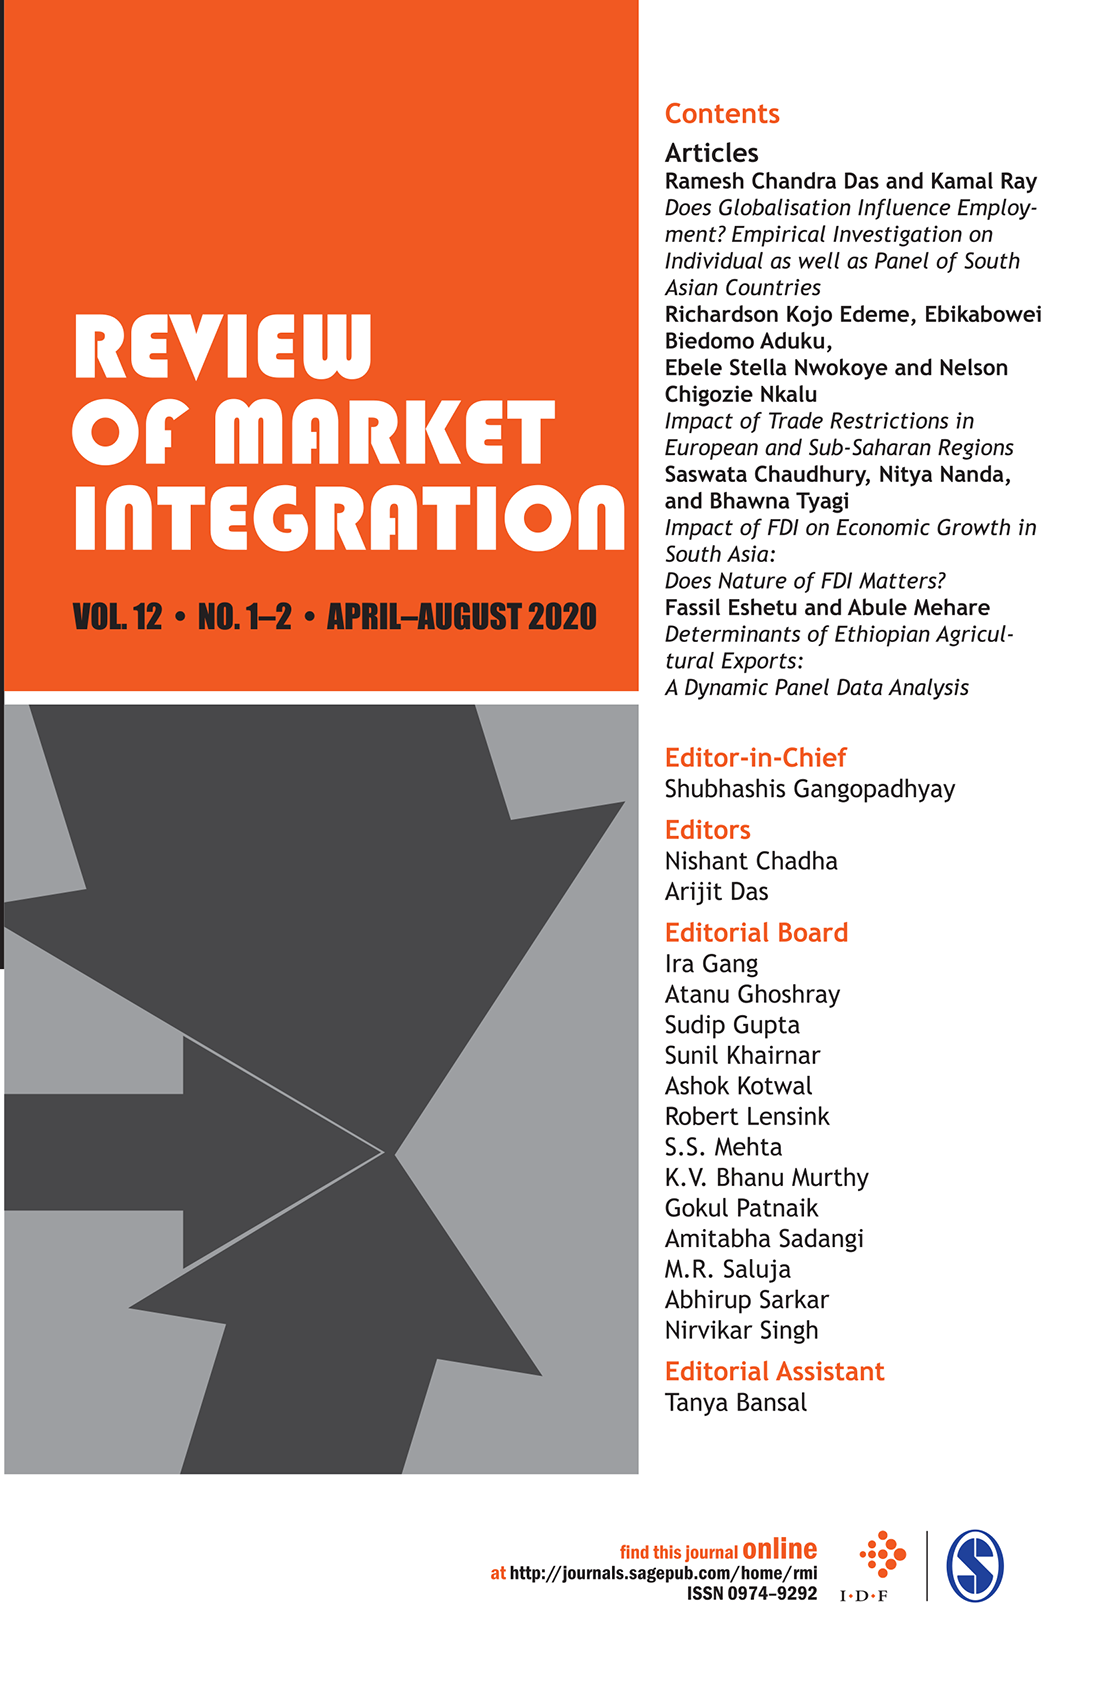 Review of Market Integration